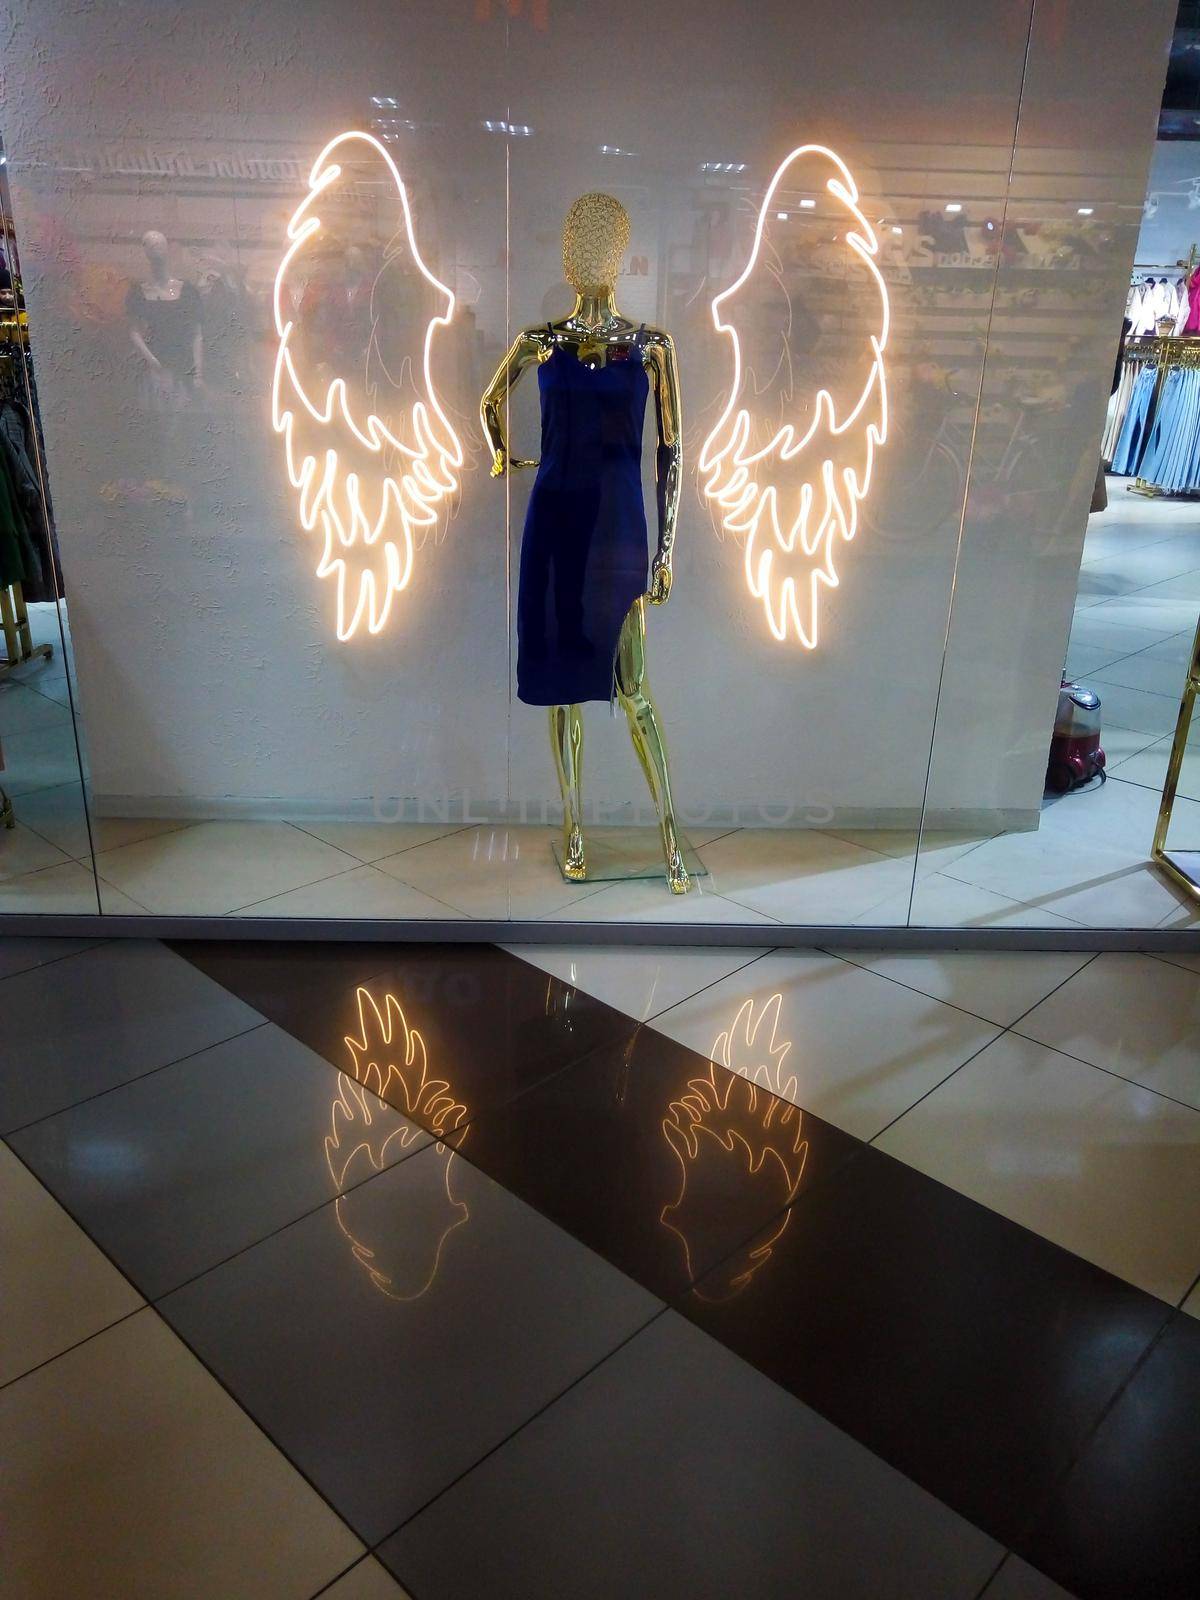 Shop window with angel mannequin, beautiful shopping center design by lapushka62